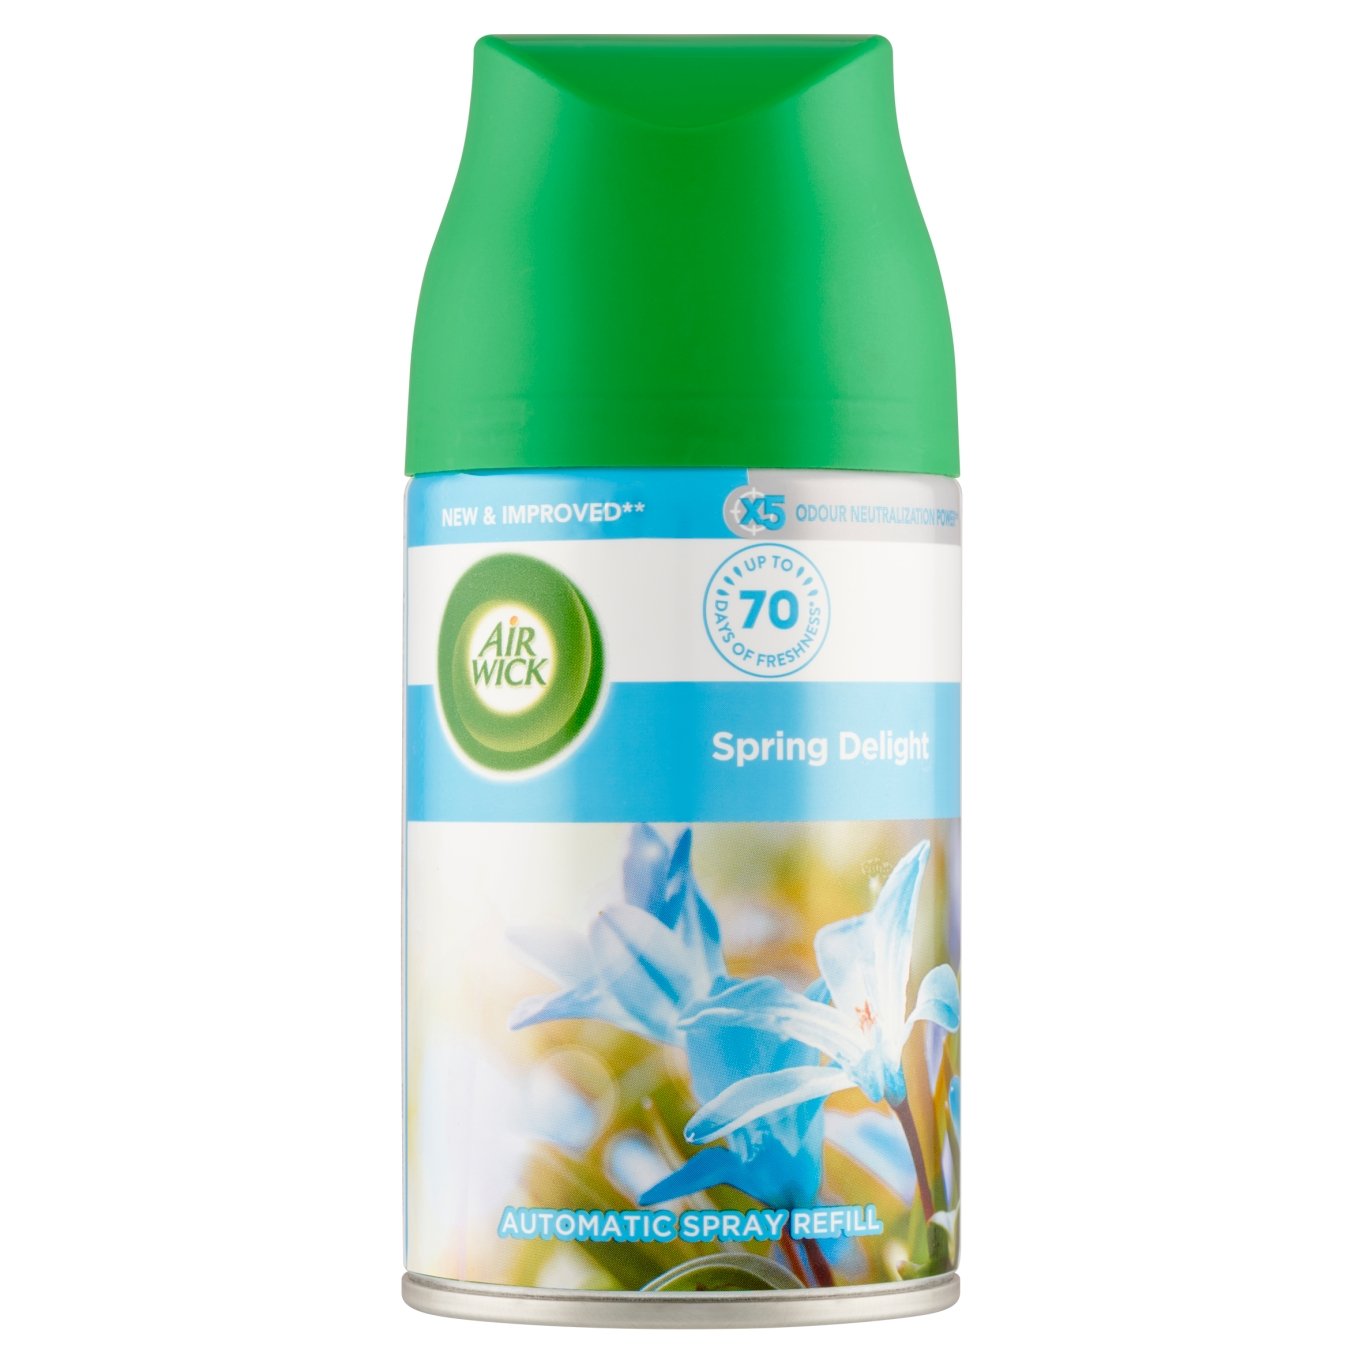 Levně Air Wick FreshMatic Spring Delight, náhradní náplň 250 ml Air Wick FreshMatic Spring Delight, náhradní náplň 250 ml Air Wick FreshMatic Spring Delight, náhradní náplň 250 ml Air Wick FreshMatic Spring Delight, náhradní náplň 250 ml Air Wick FreshMatic Spr